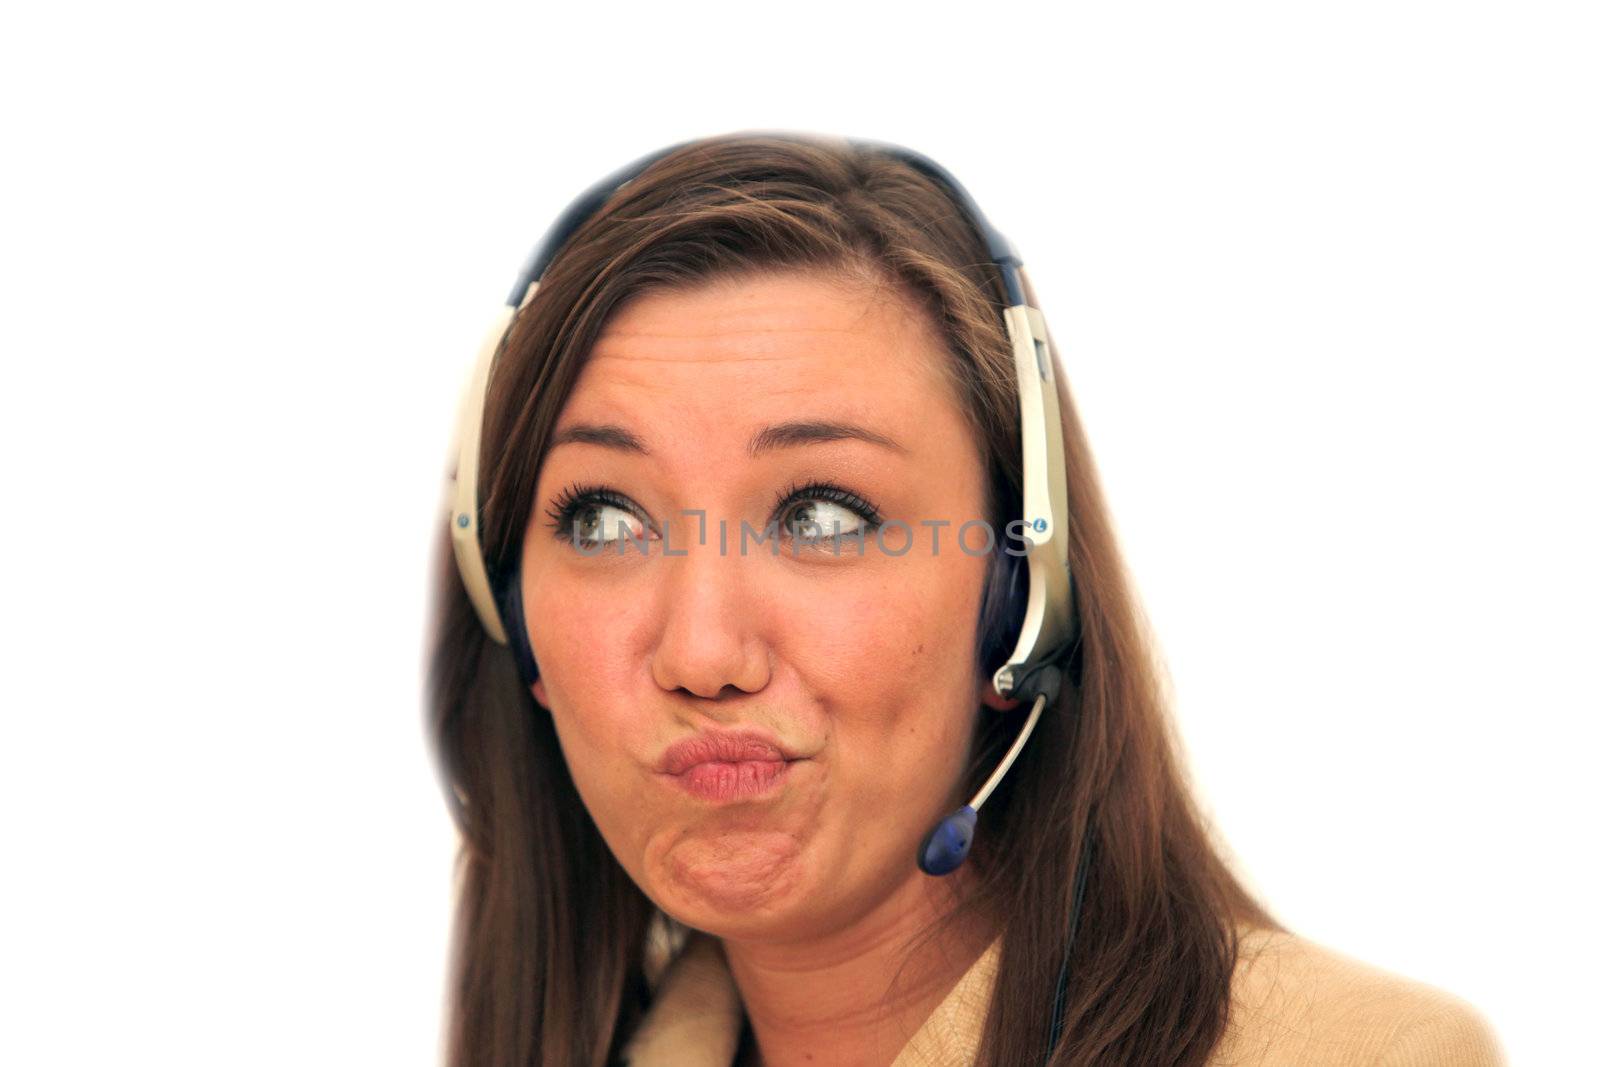 Helpless woman with headset looking up